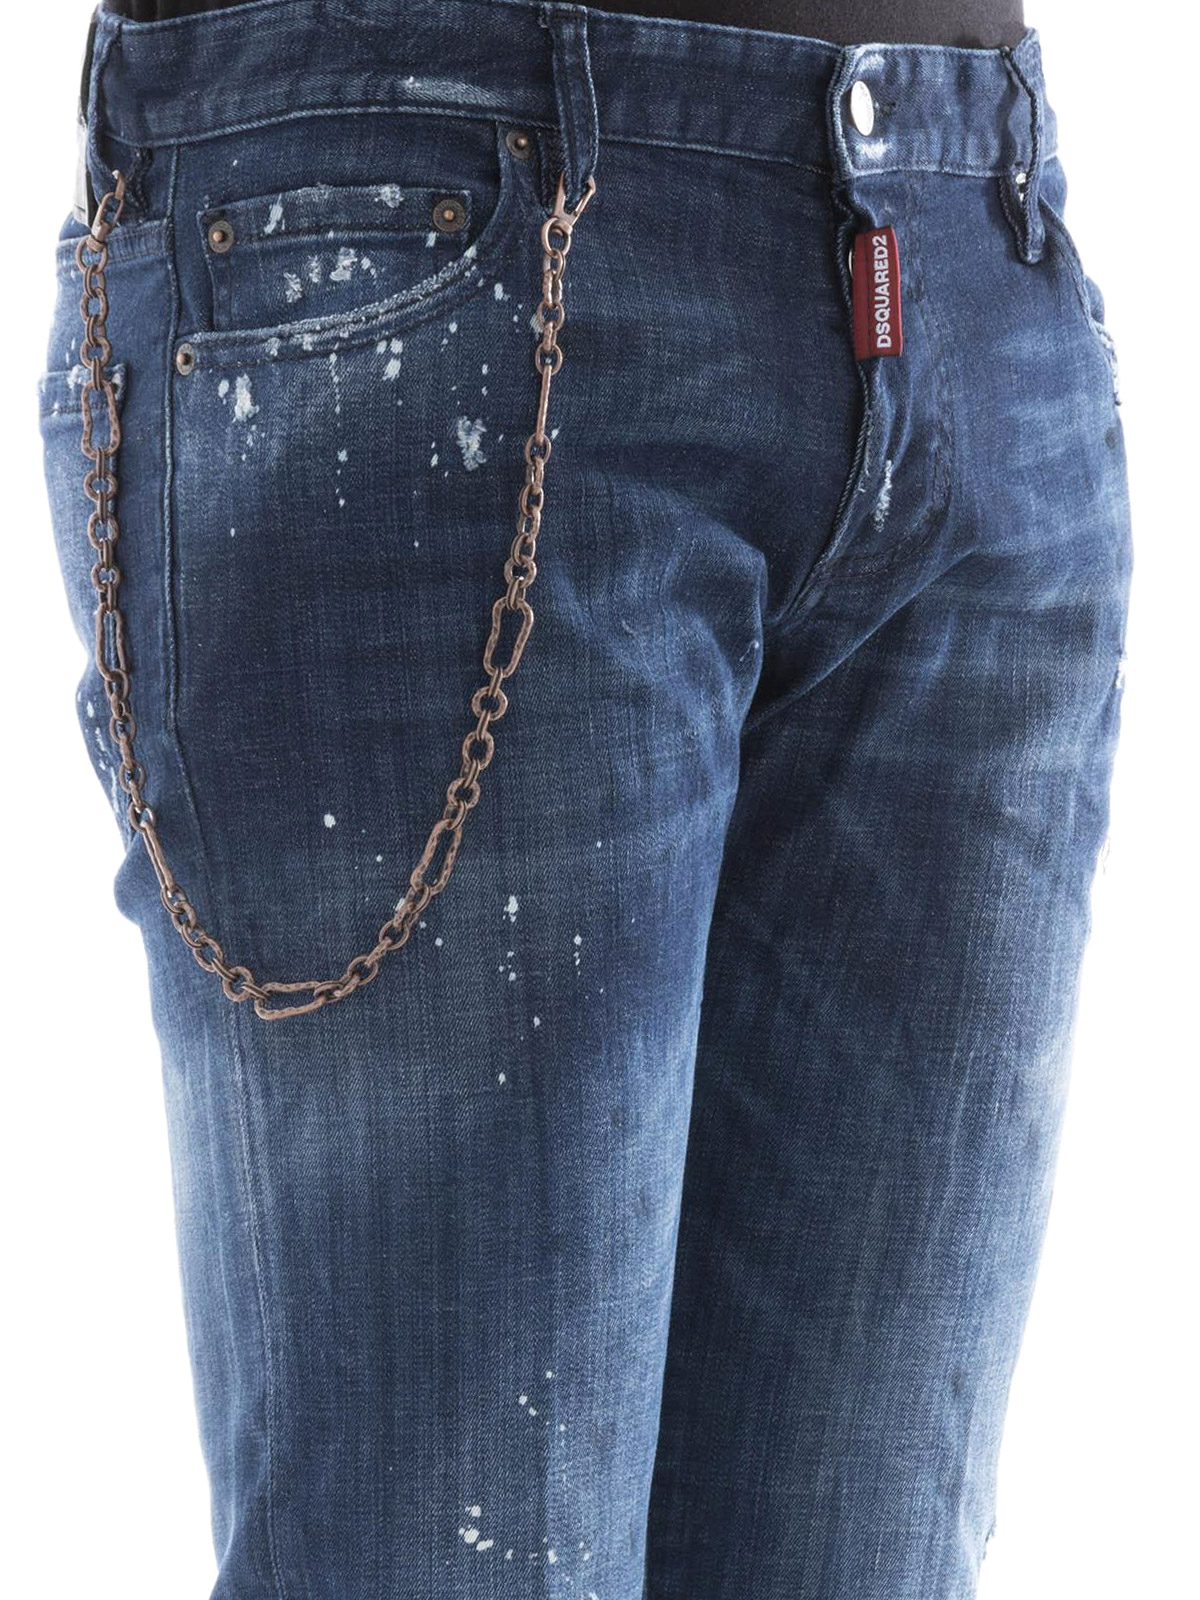 jeans chain online